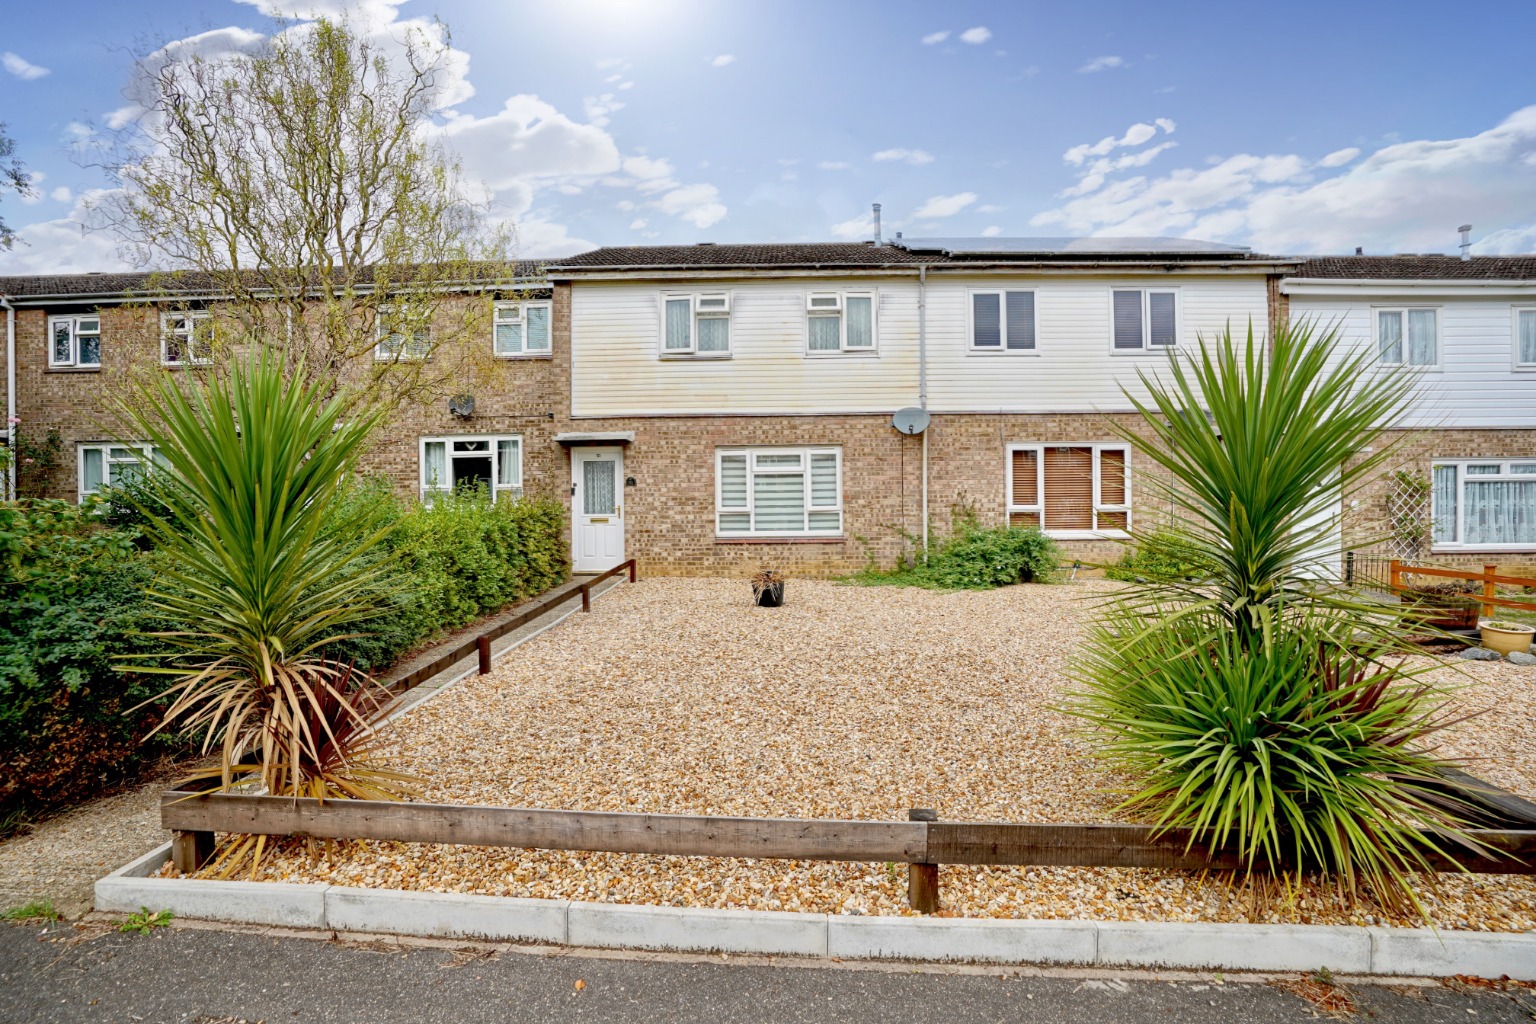 3 bed  for sale in Marchioness Way, St. Neots, PE19